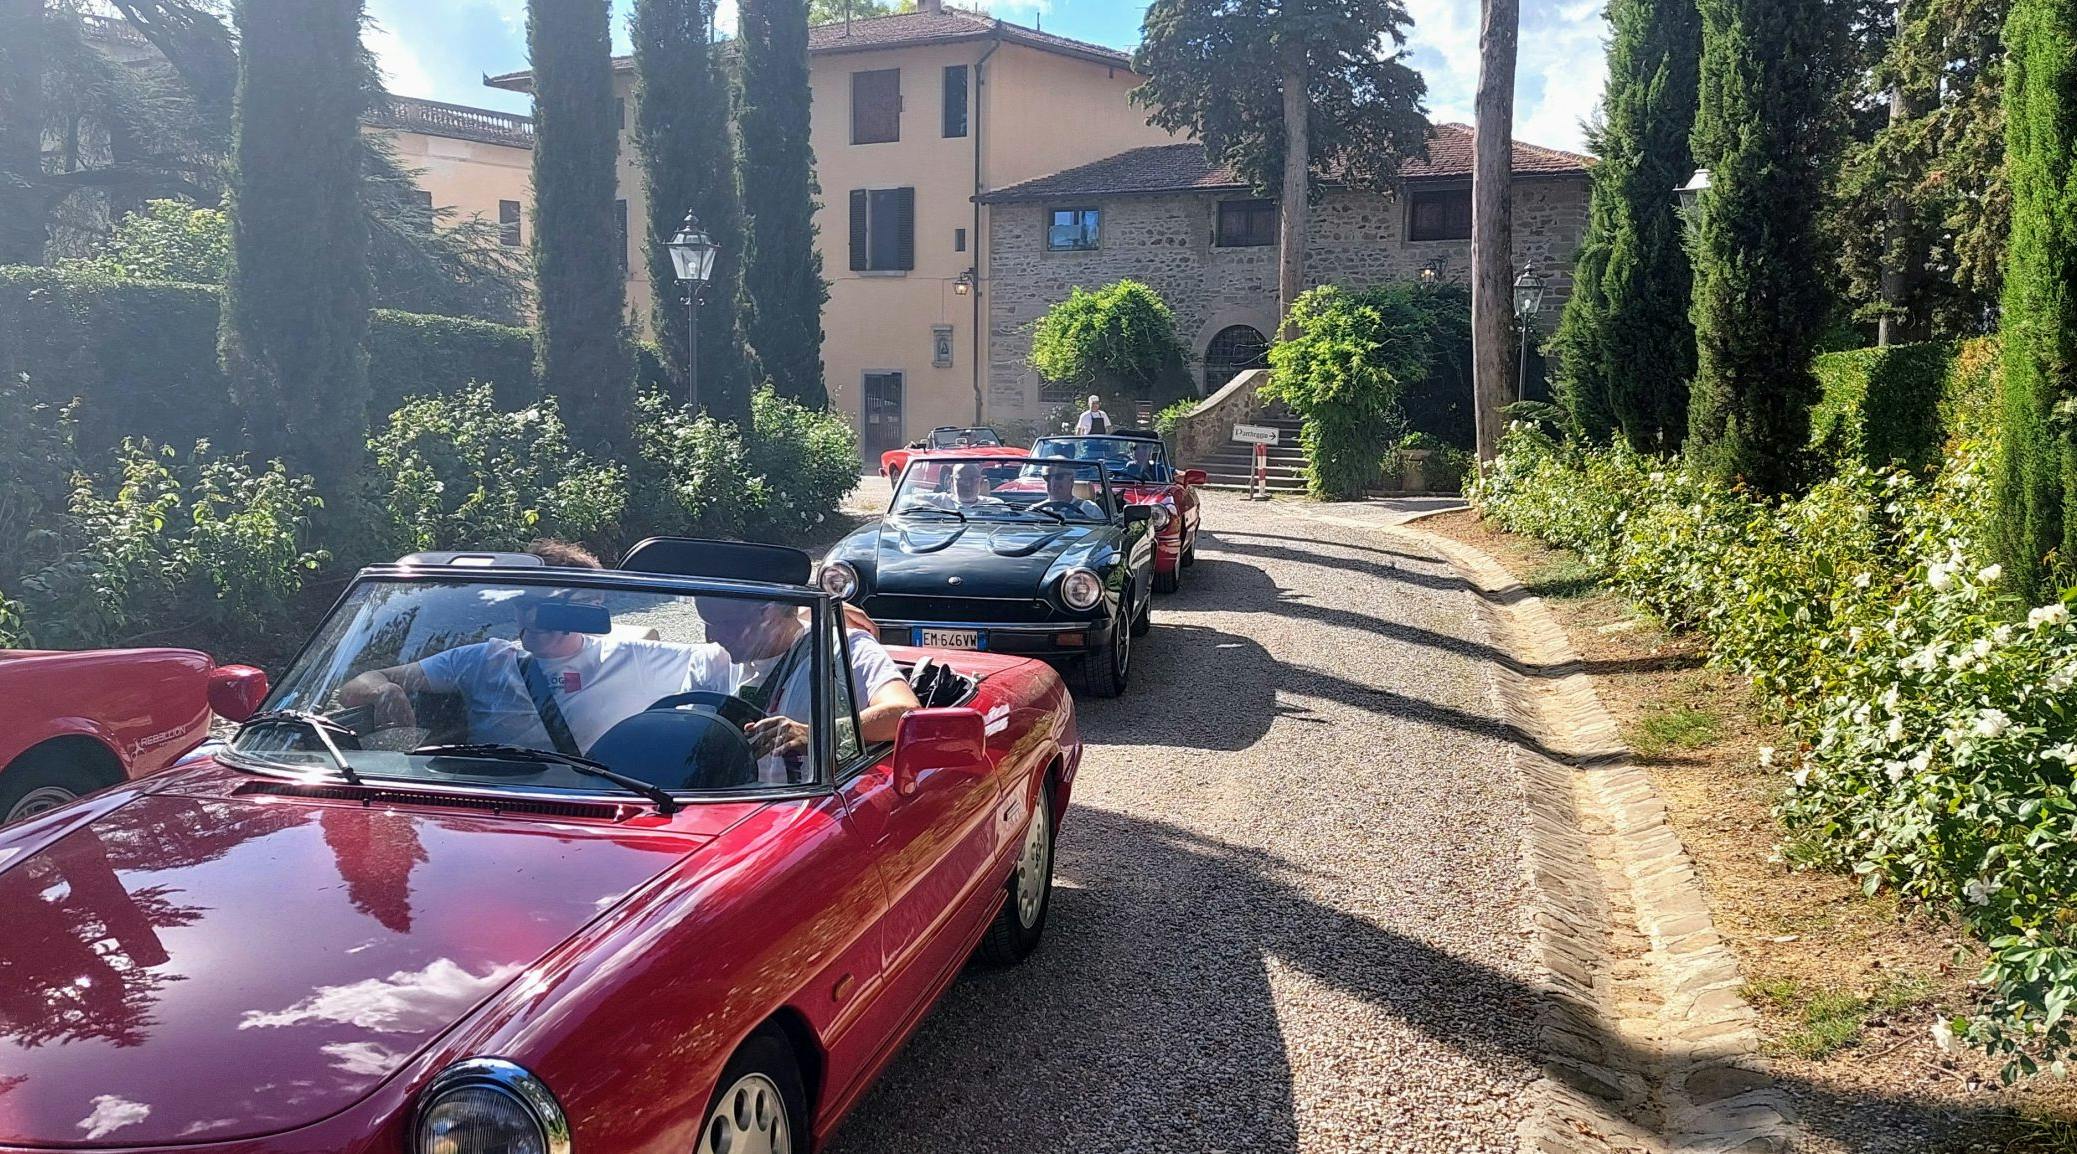 vintage cars incentive trip in tuscany